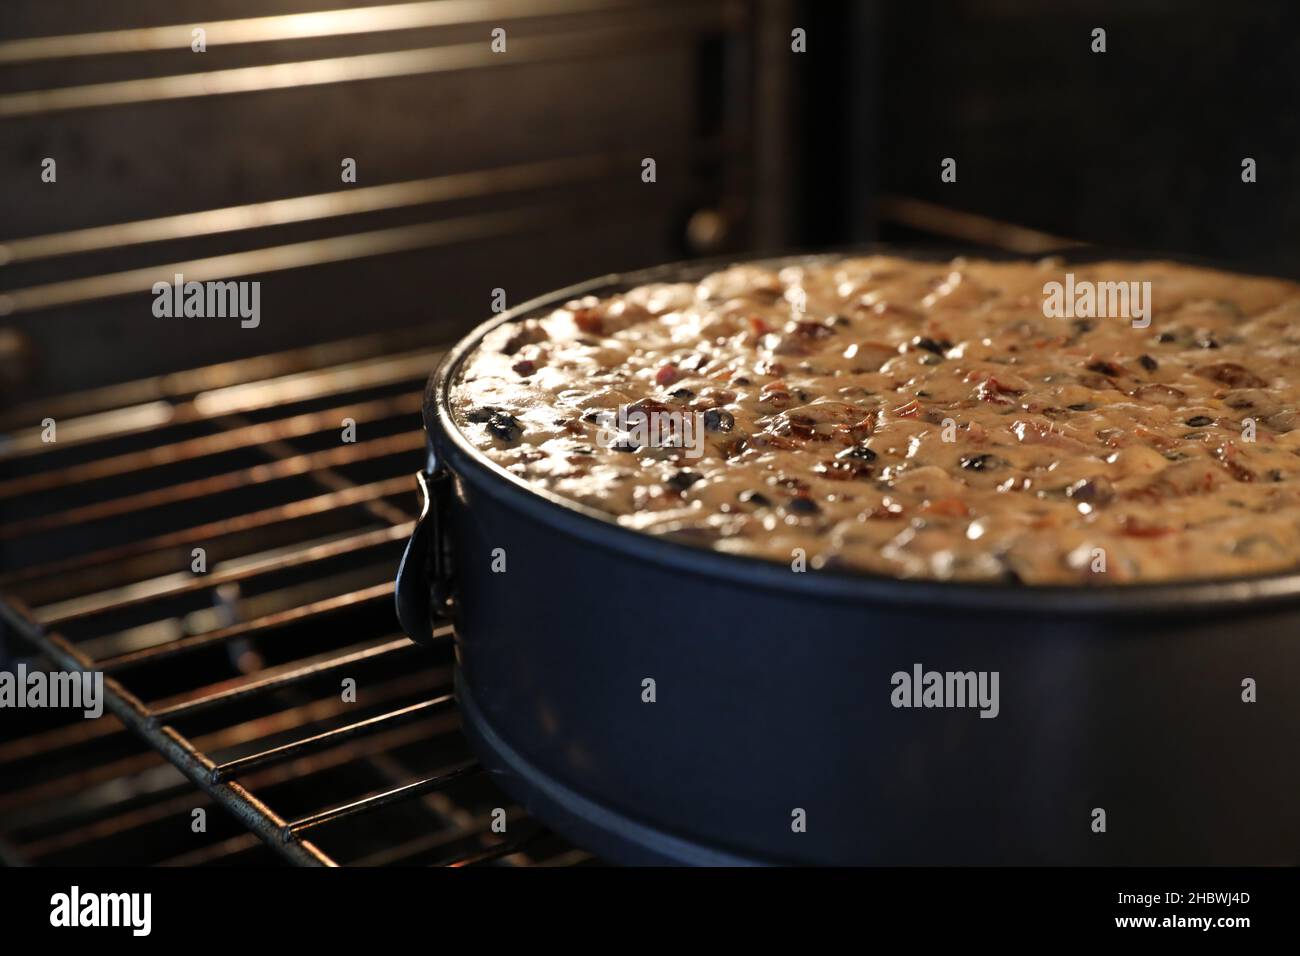 A close up large round traditional Christmas cake in the oven slowly baking or cooking. A variety of fruit visible on the still wet moist surface. Stock Photo